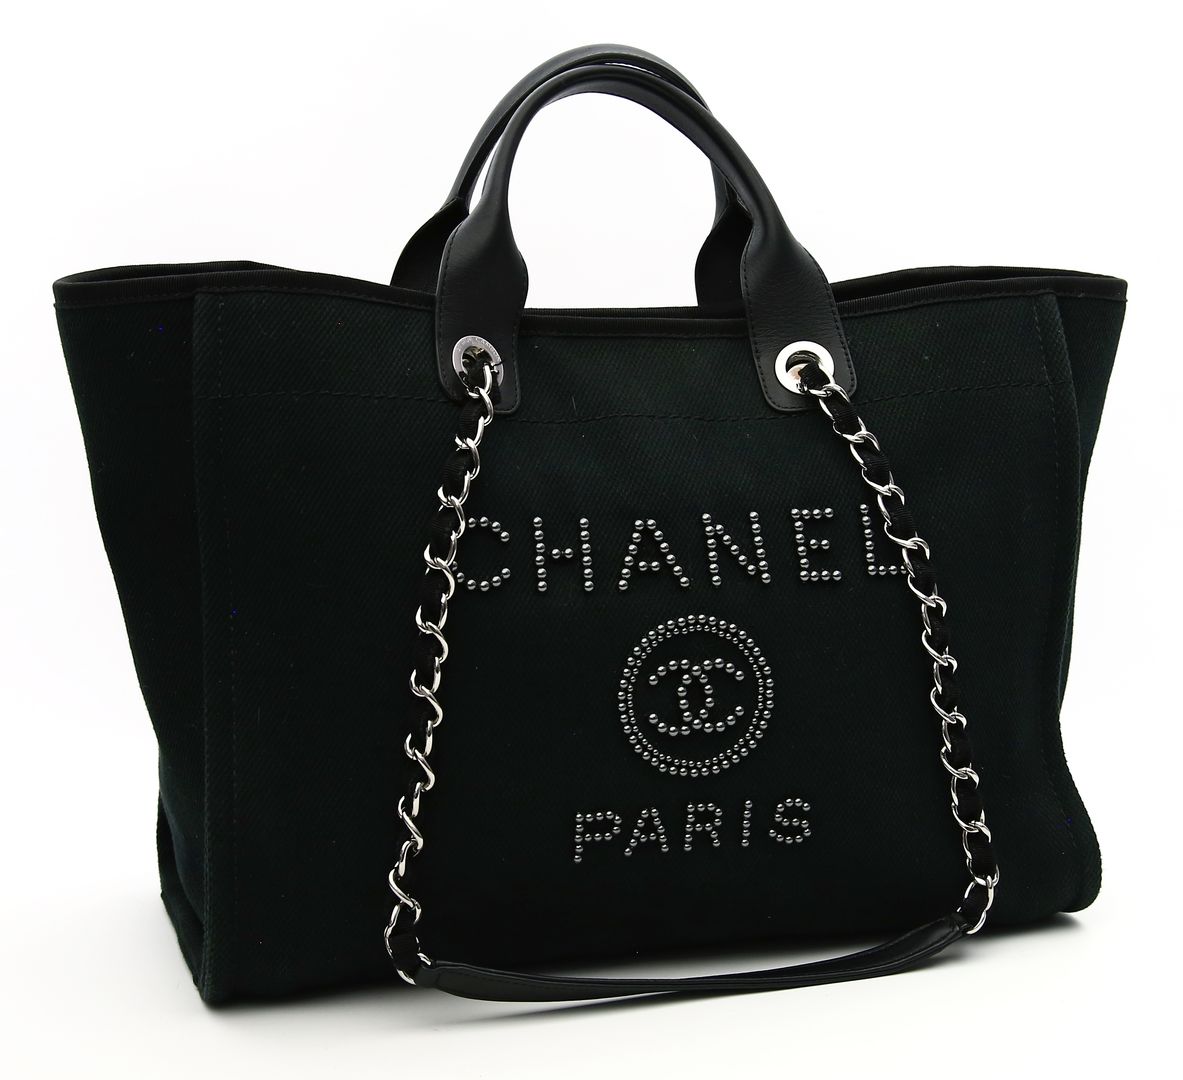 "Deauville Studded Logo Tote Bag", Chanel.